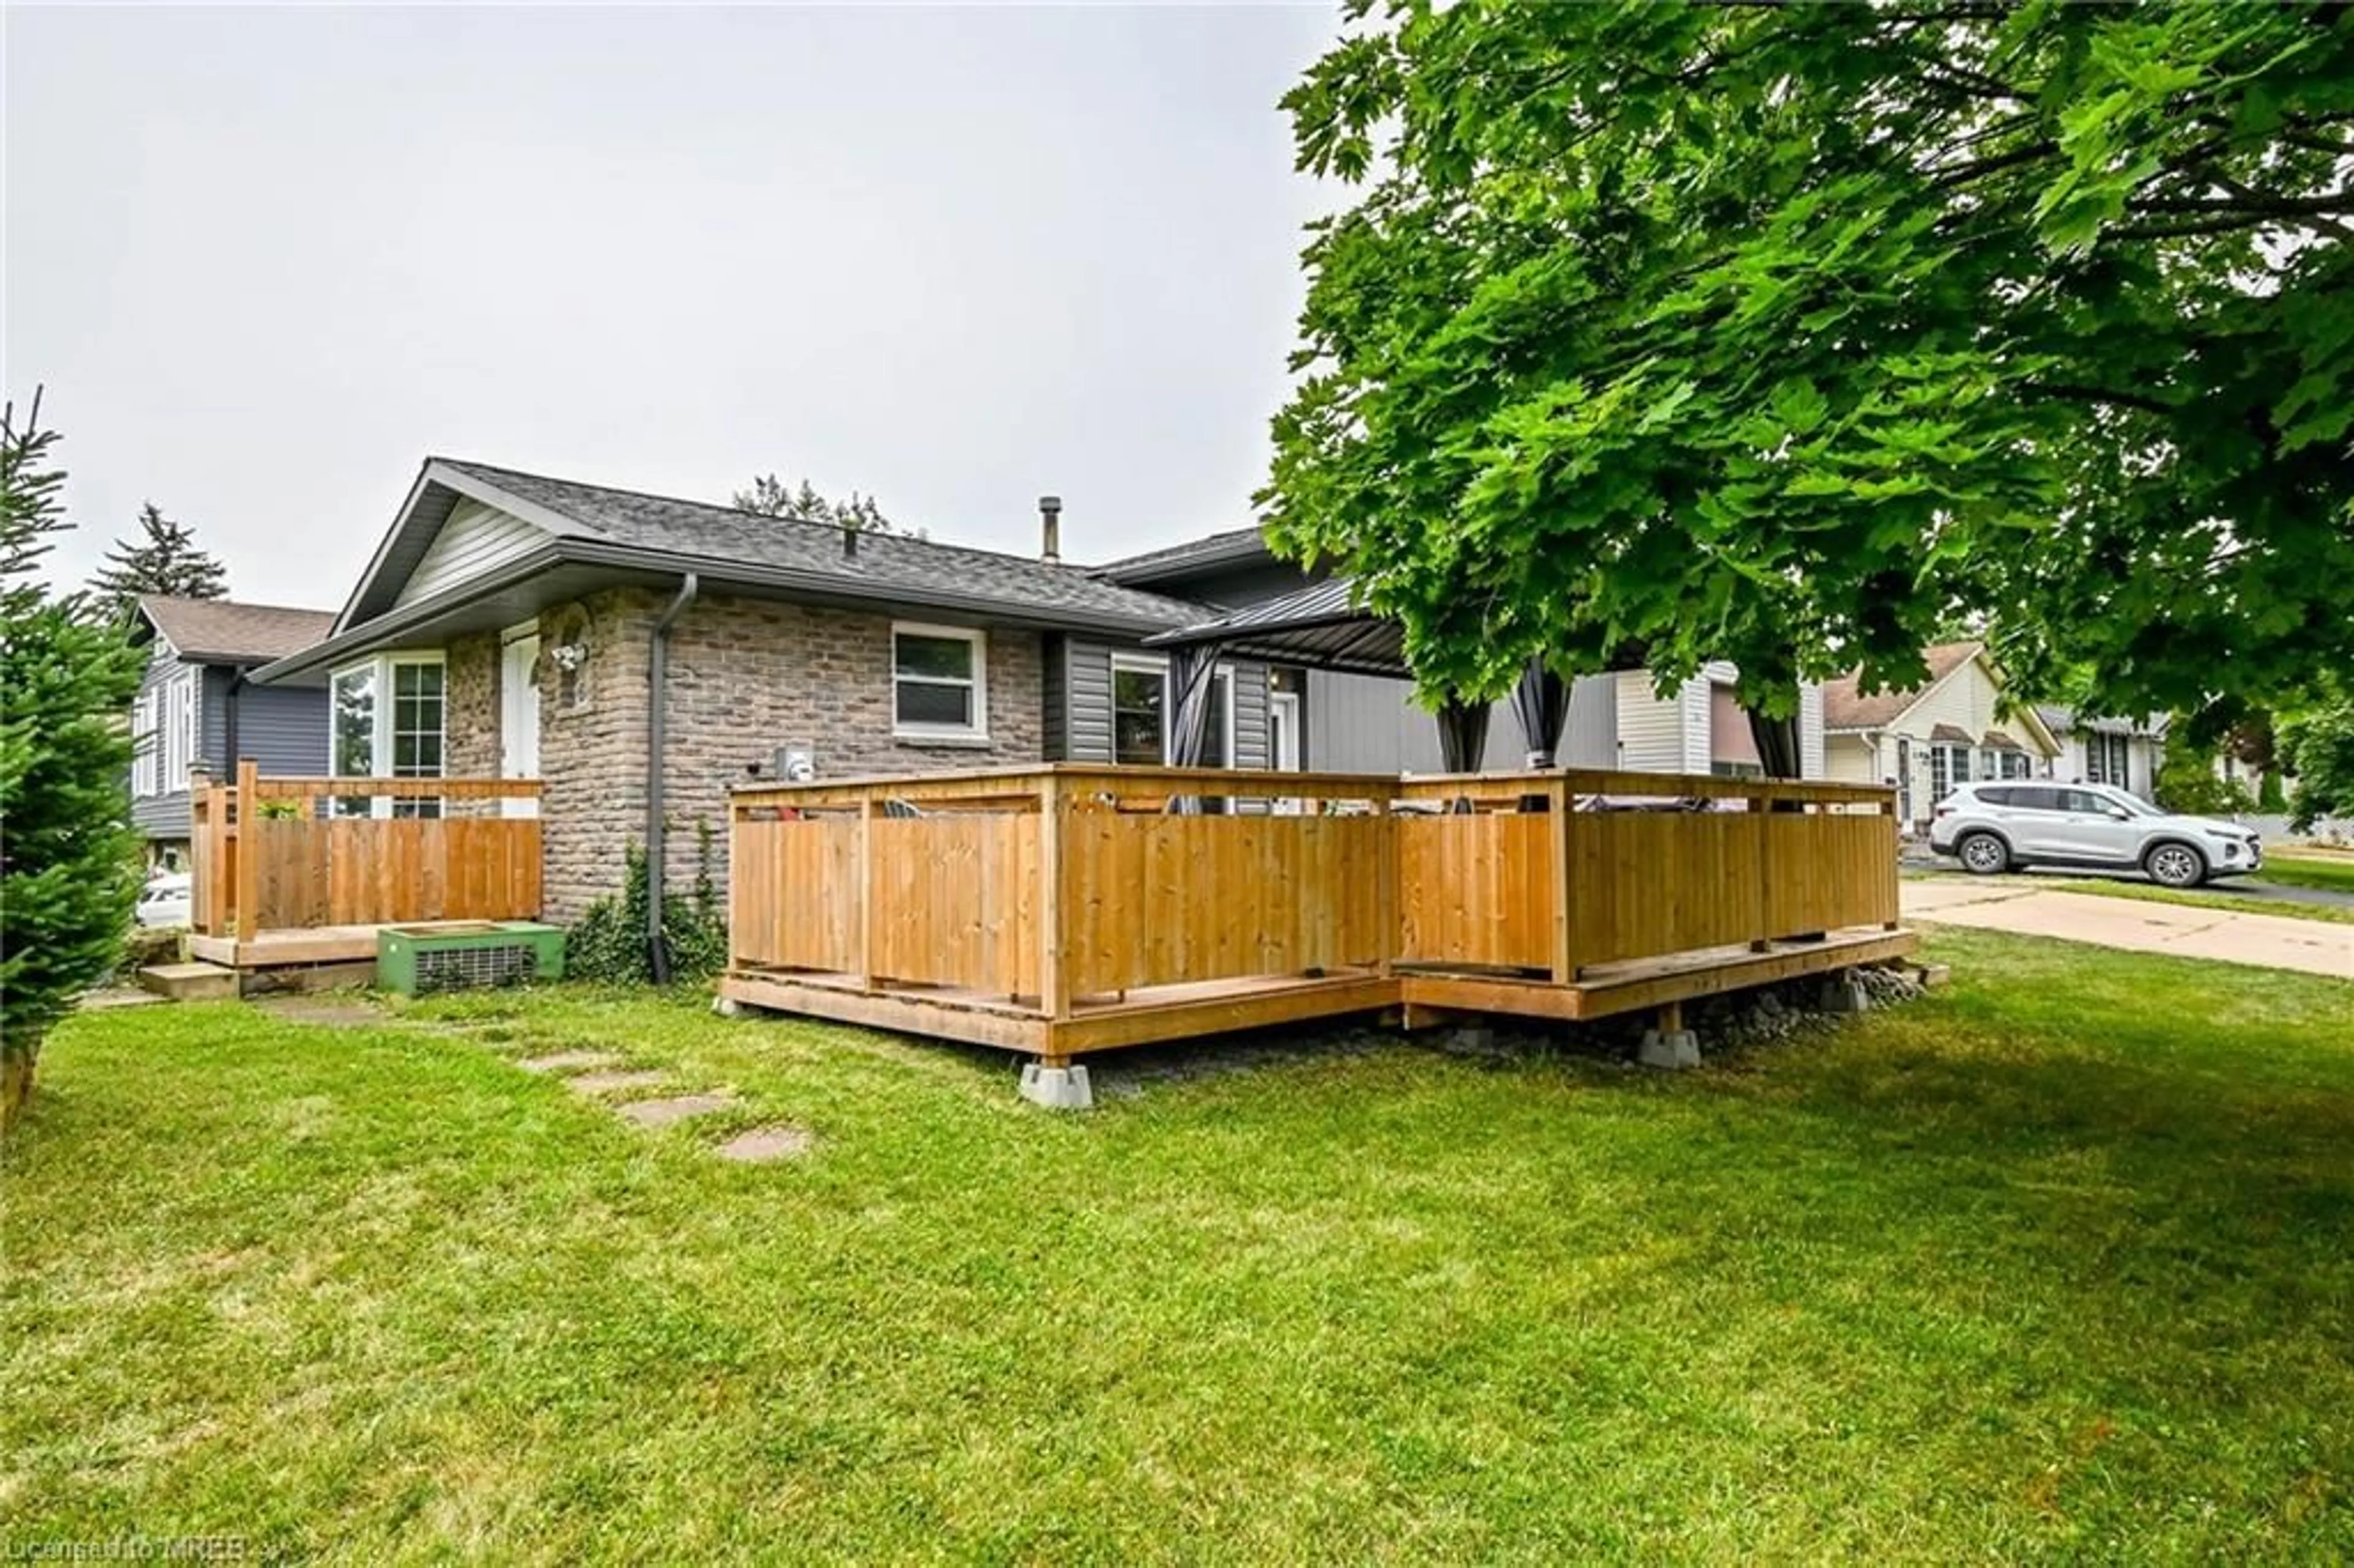 Fenced yard for 6 Commerford St, Thorold Ontario L2V 4P6